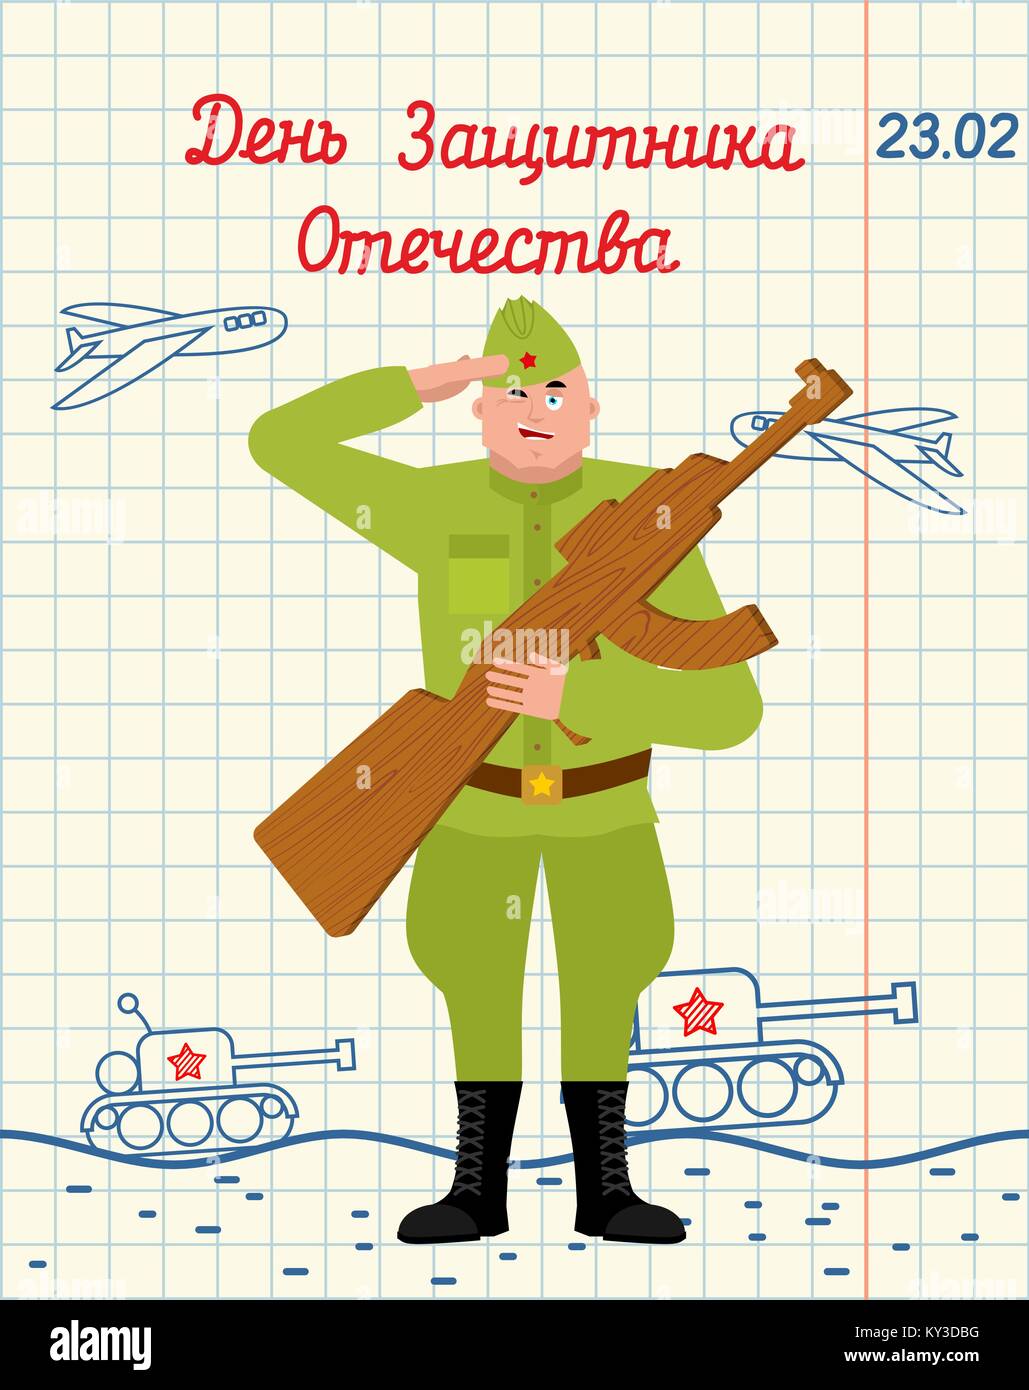 February 23. Hand drawing in notebook paper. Russian soldier and Wood gun toys. Military holiday in Russia. Greeting card. Russian text: Defenders of  Stock Vector